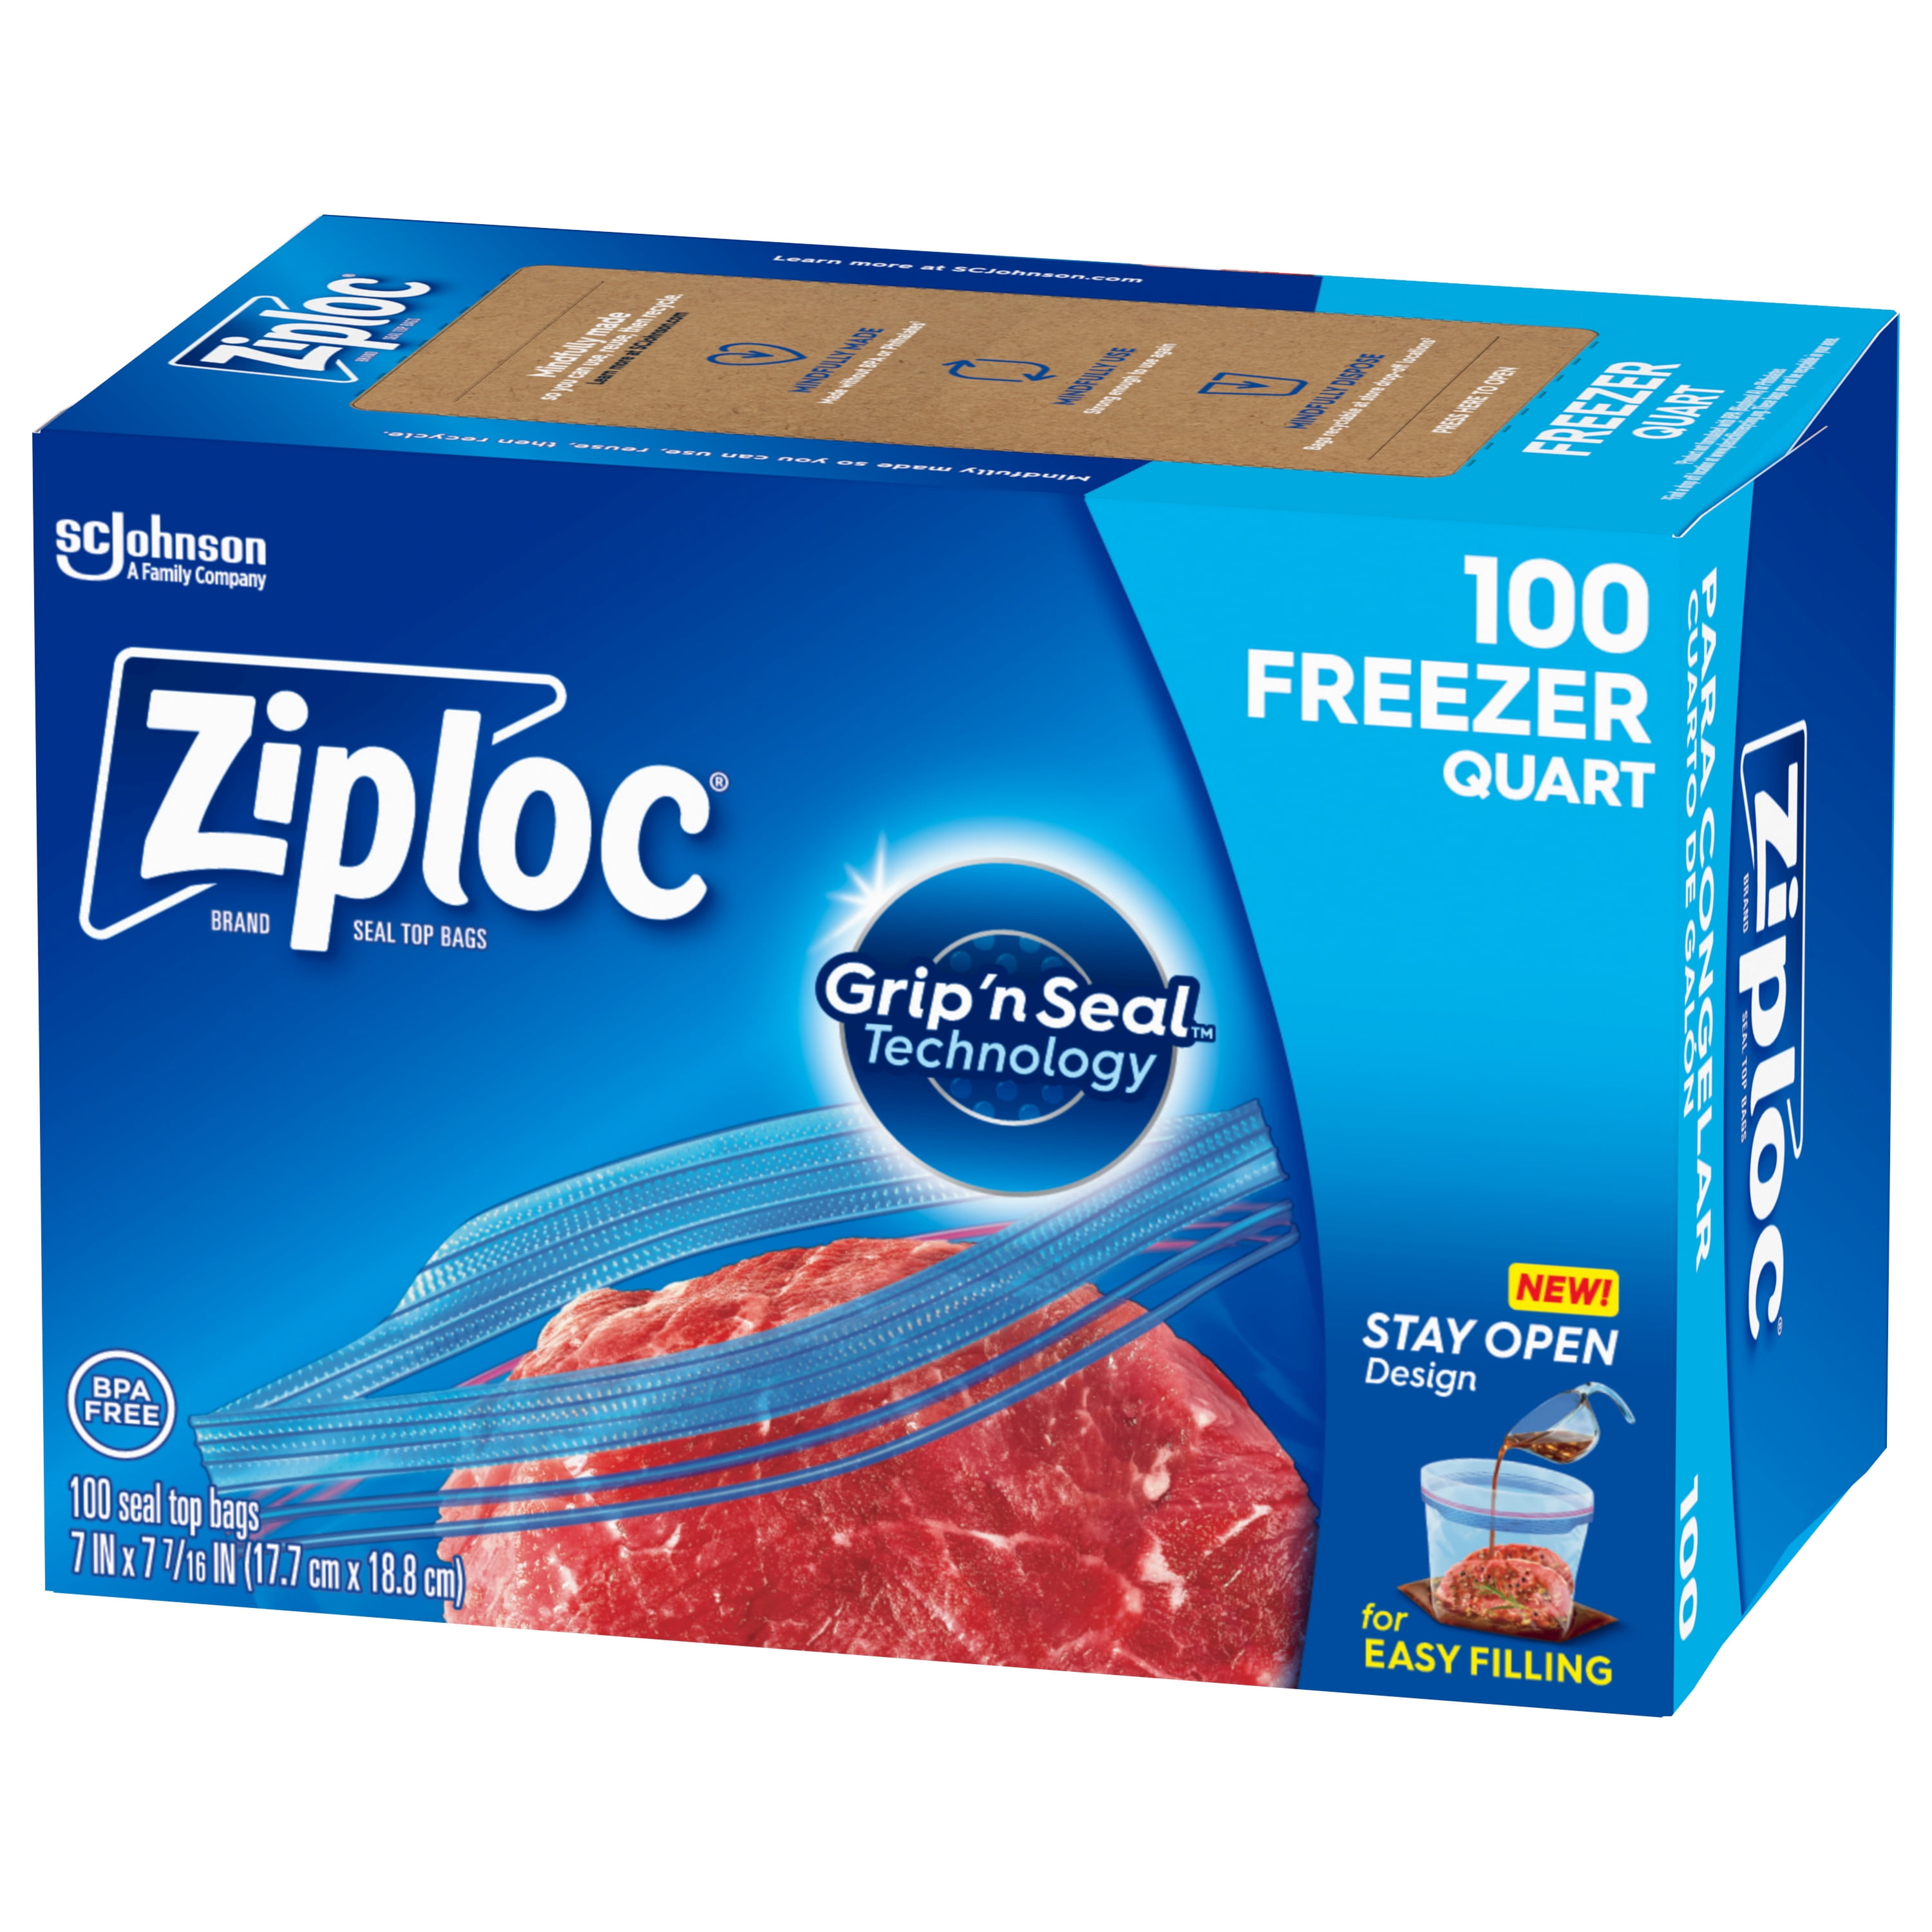 Ziploc® Brand Storage Bags With New Stay Open Design, Quart, 100 Count,  Patented Stand Up Bottom, Easy To Fill Food Storage Bags, Unloc A Free Set  Of